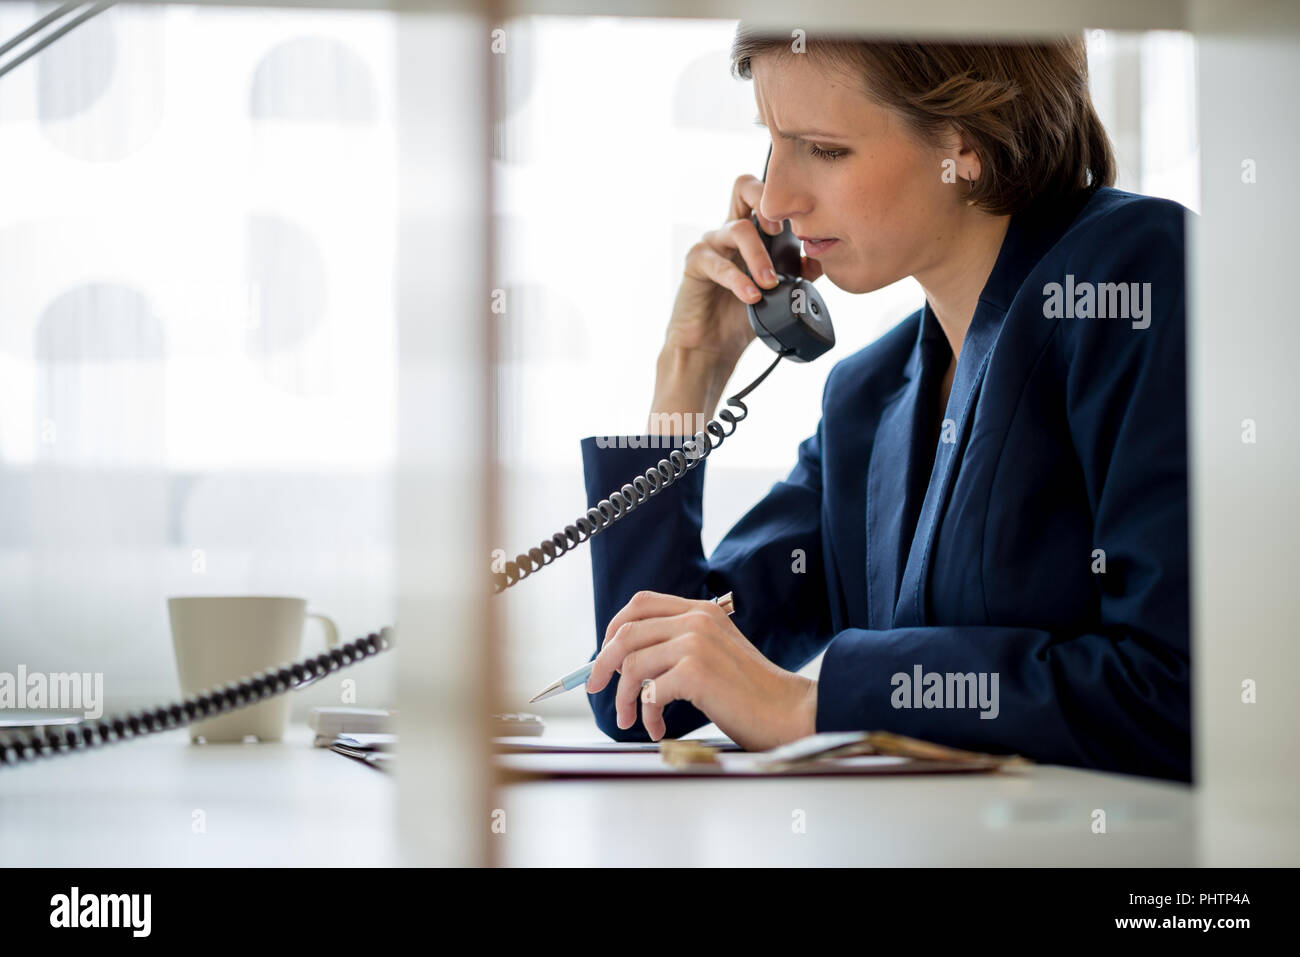 Businesswoman or manageress talking on a landline phone with a worried expression while looking at documents. View through an interior glass partition Stock Photo